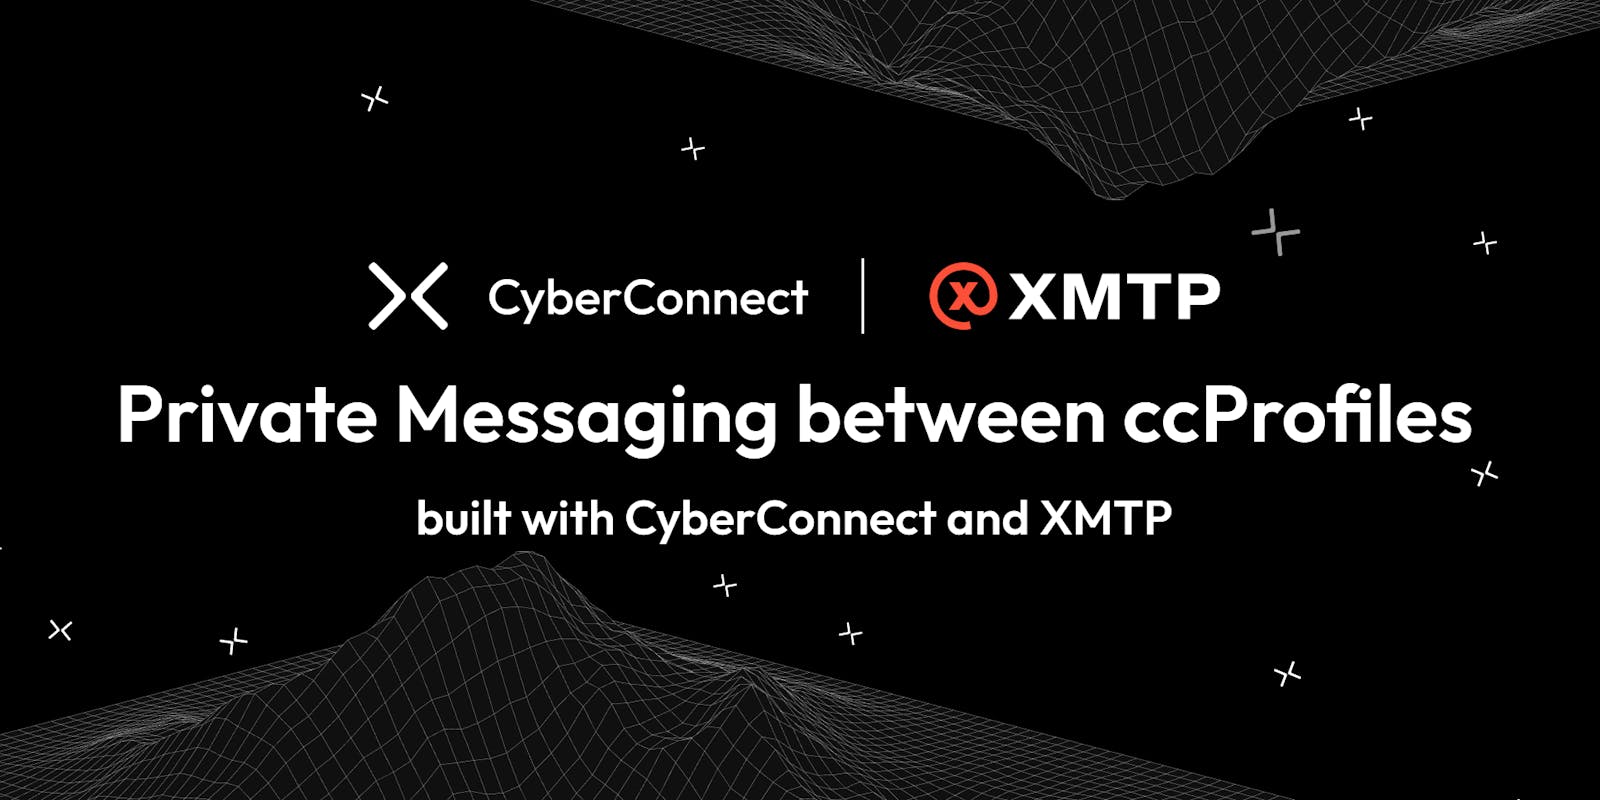 Integrating XMTP into CyberConnect: A Guide